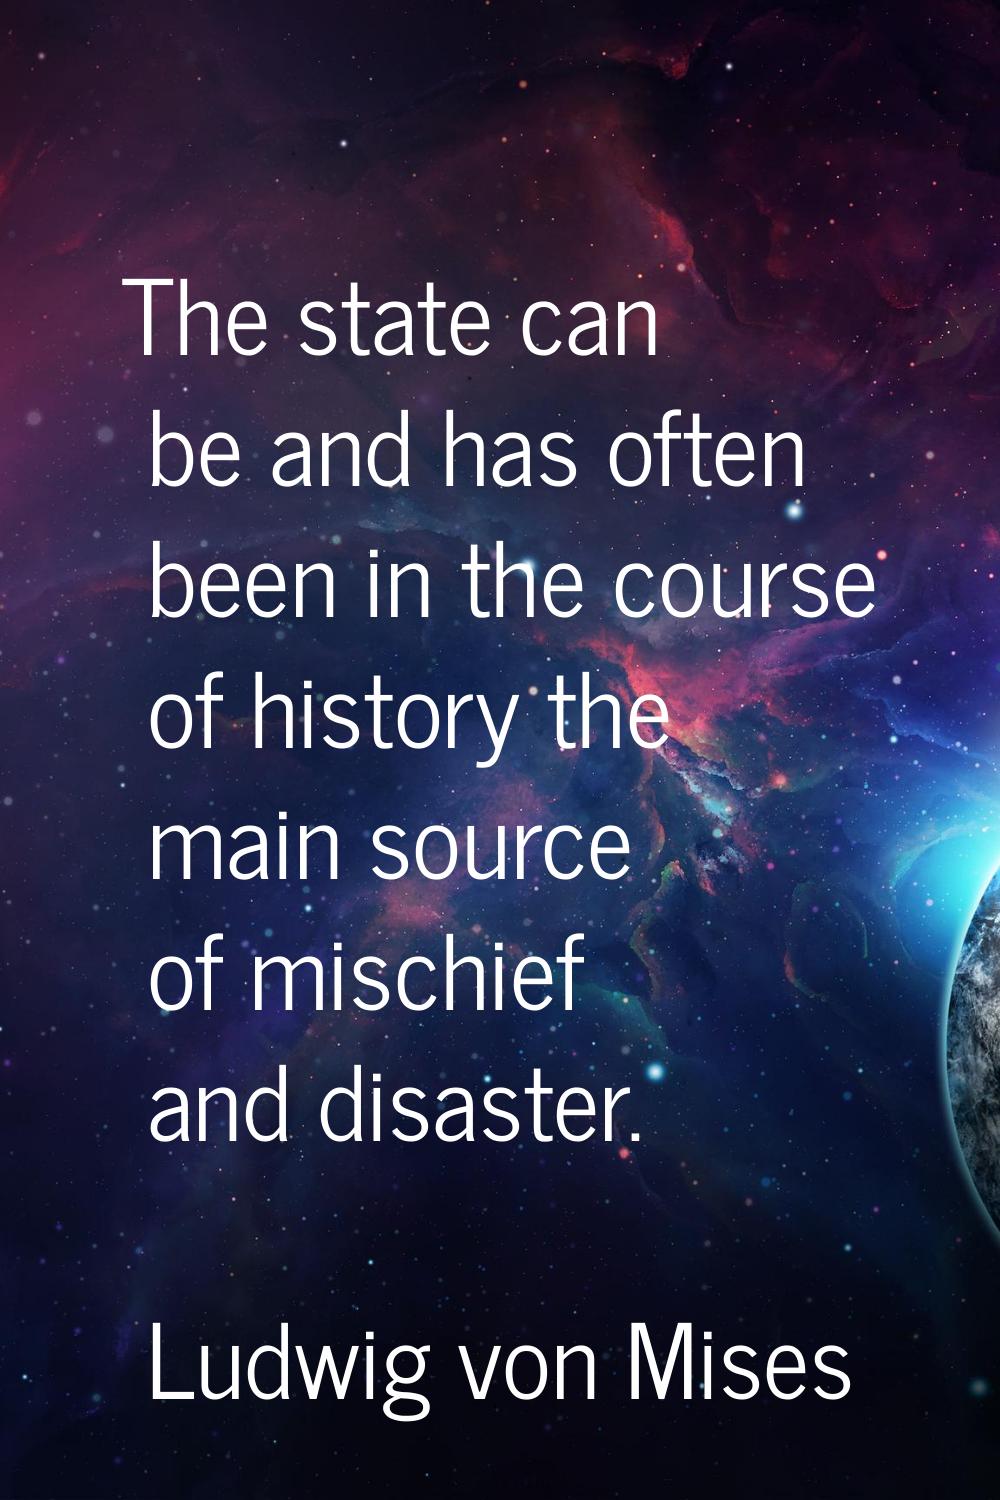 The state can be and has often been in the course of history the main source of mischief and disast